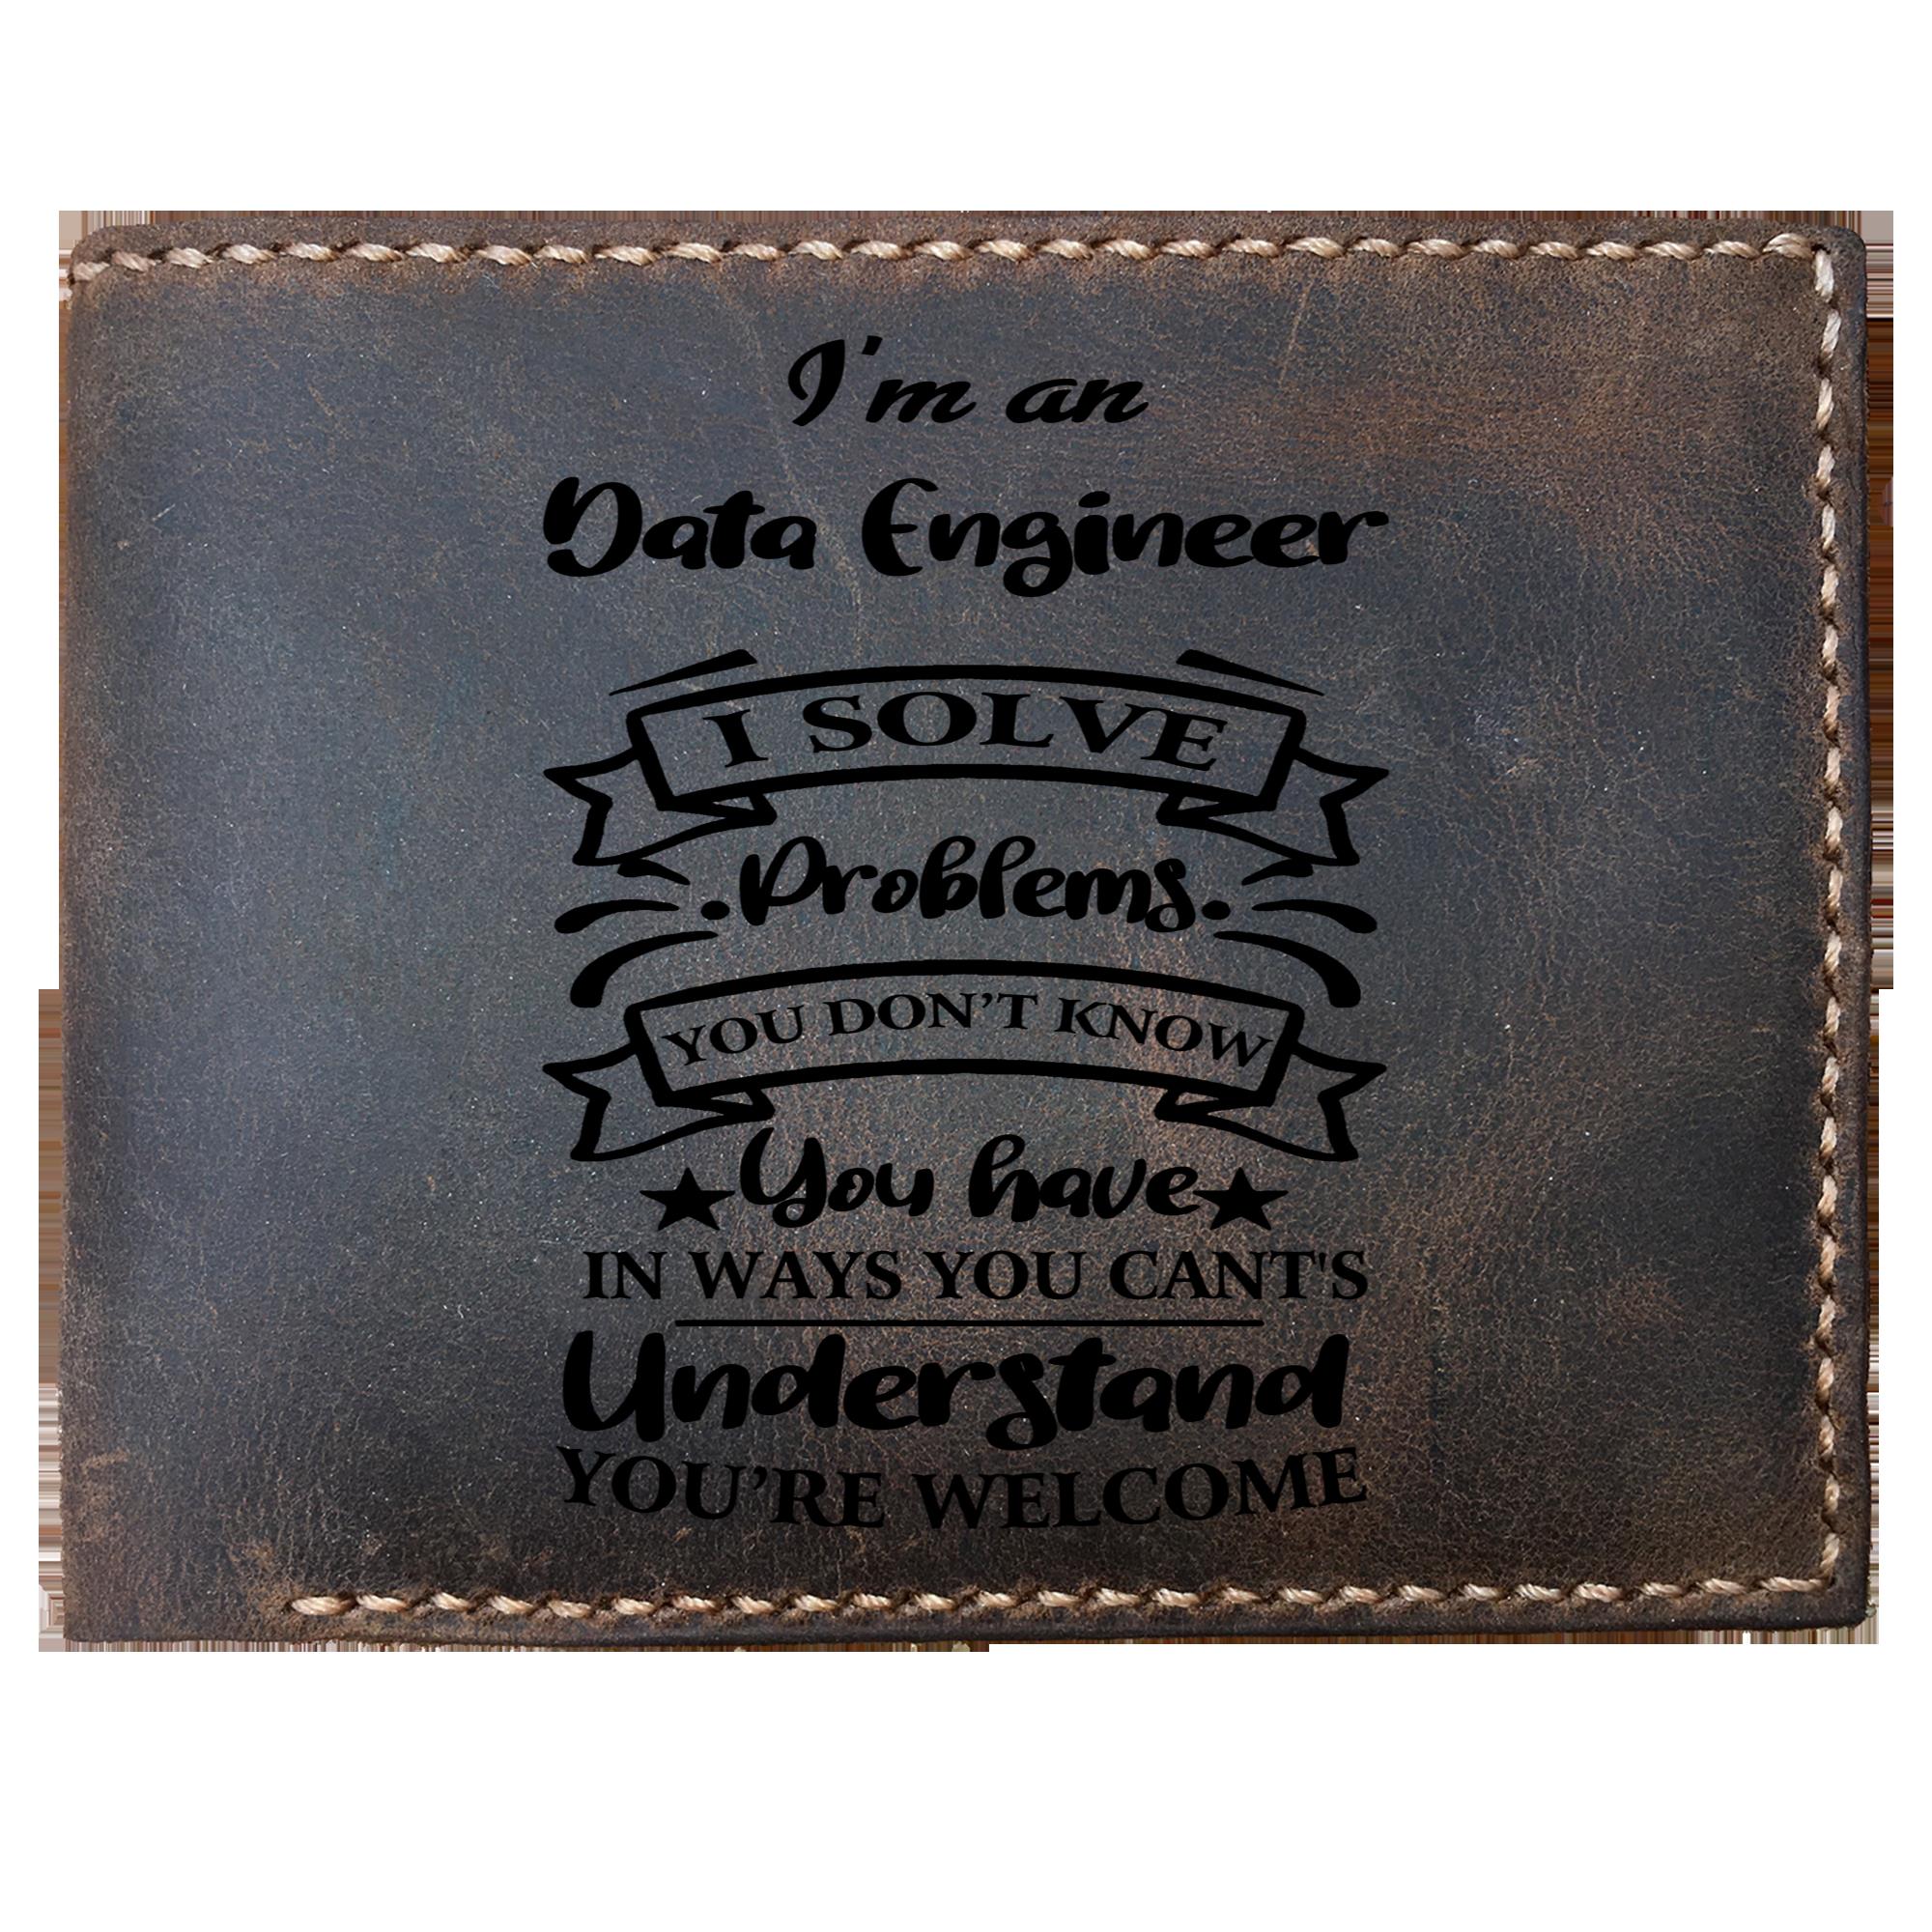 Skitongifts Funny Custom Laser Engraved Bifold Leather Wallet For Men, I'm an Data Engineer Solve Problems, Father's Day Gifts